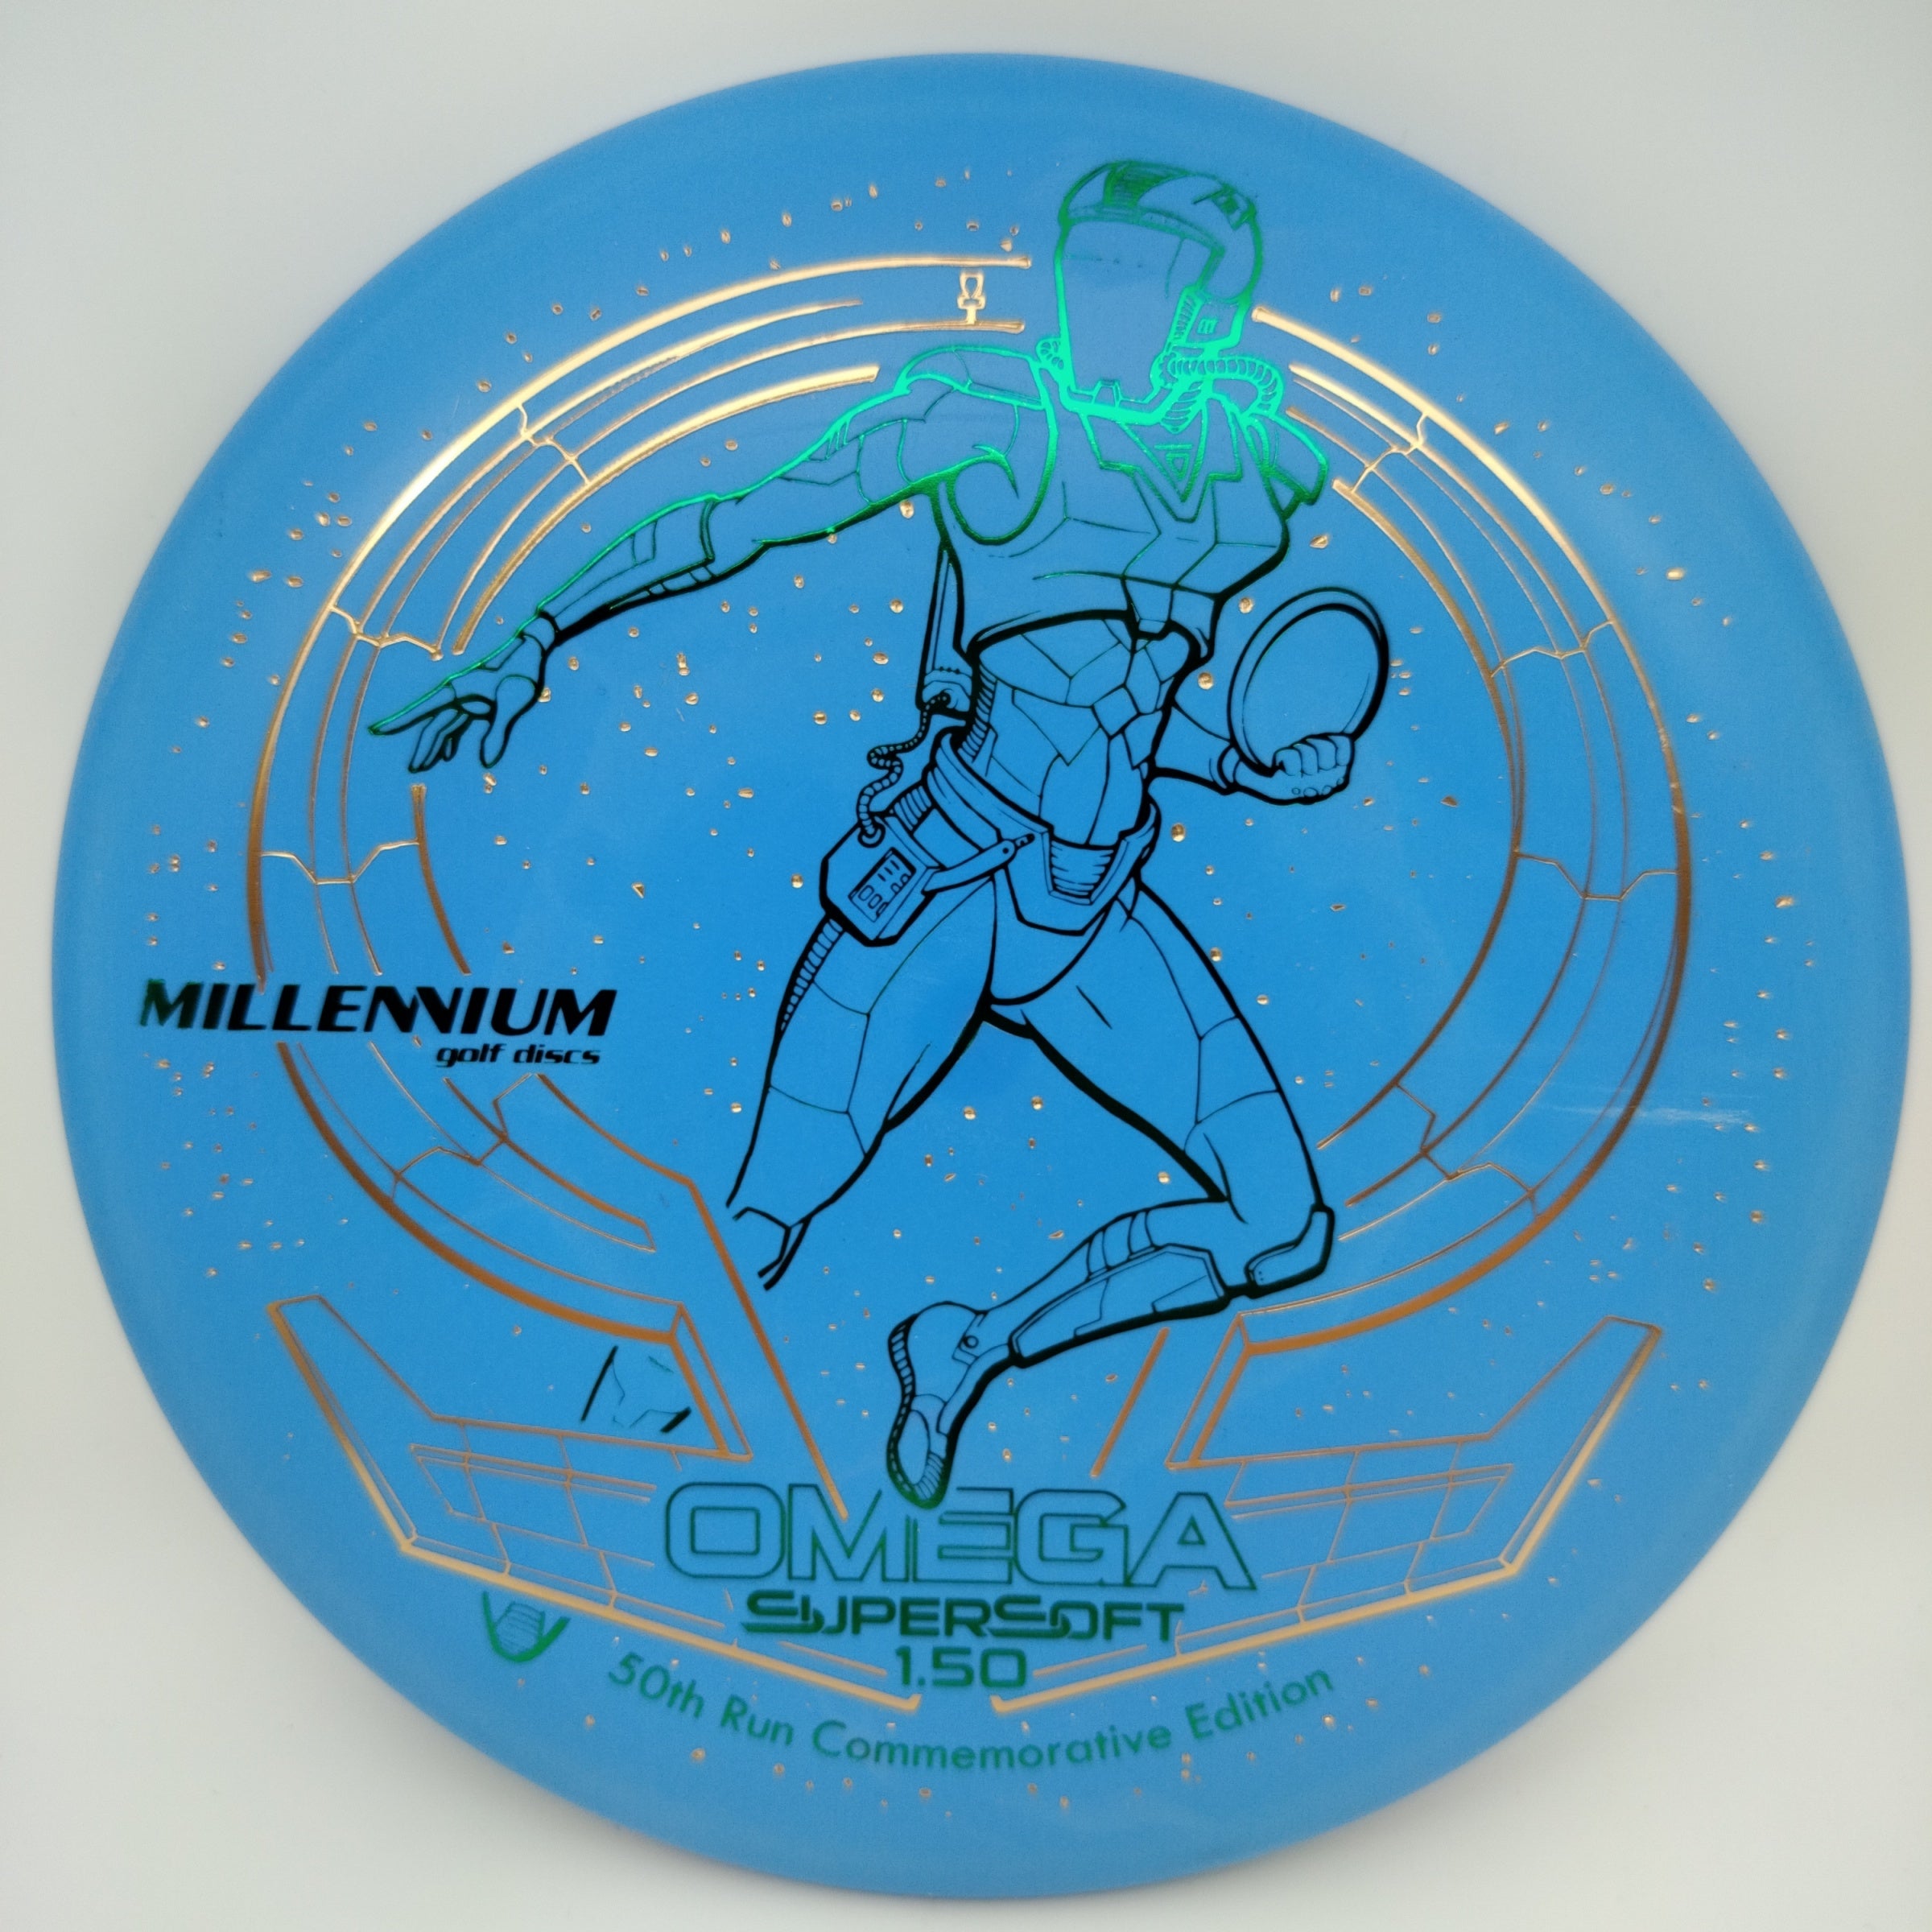 Millennium Omega SuperSoft Limited Edition 1.50